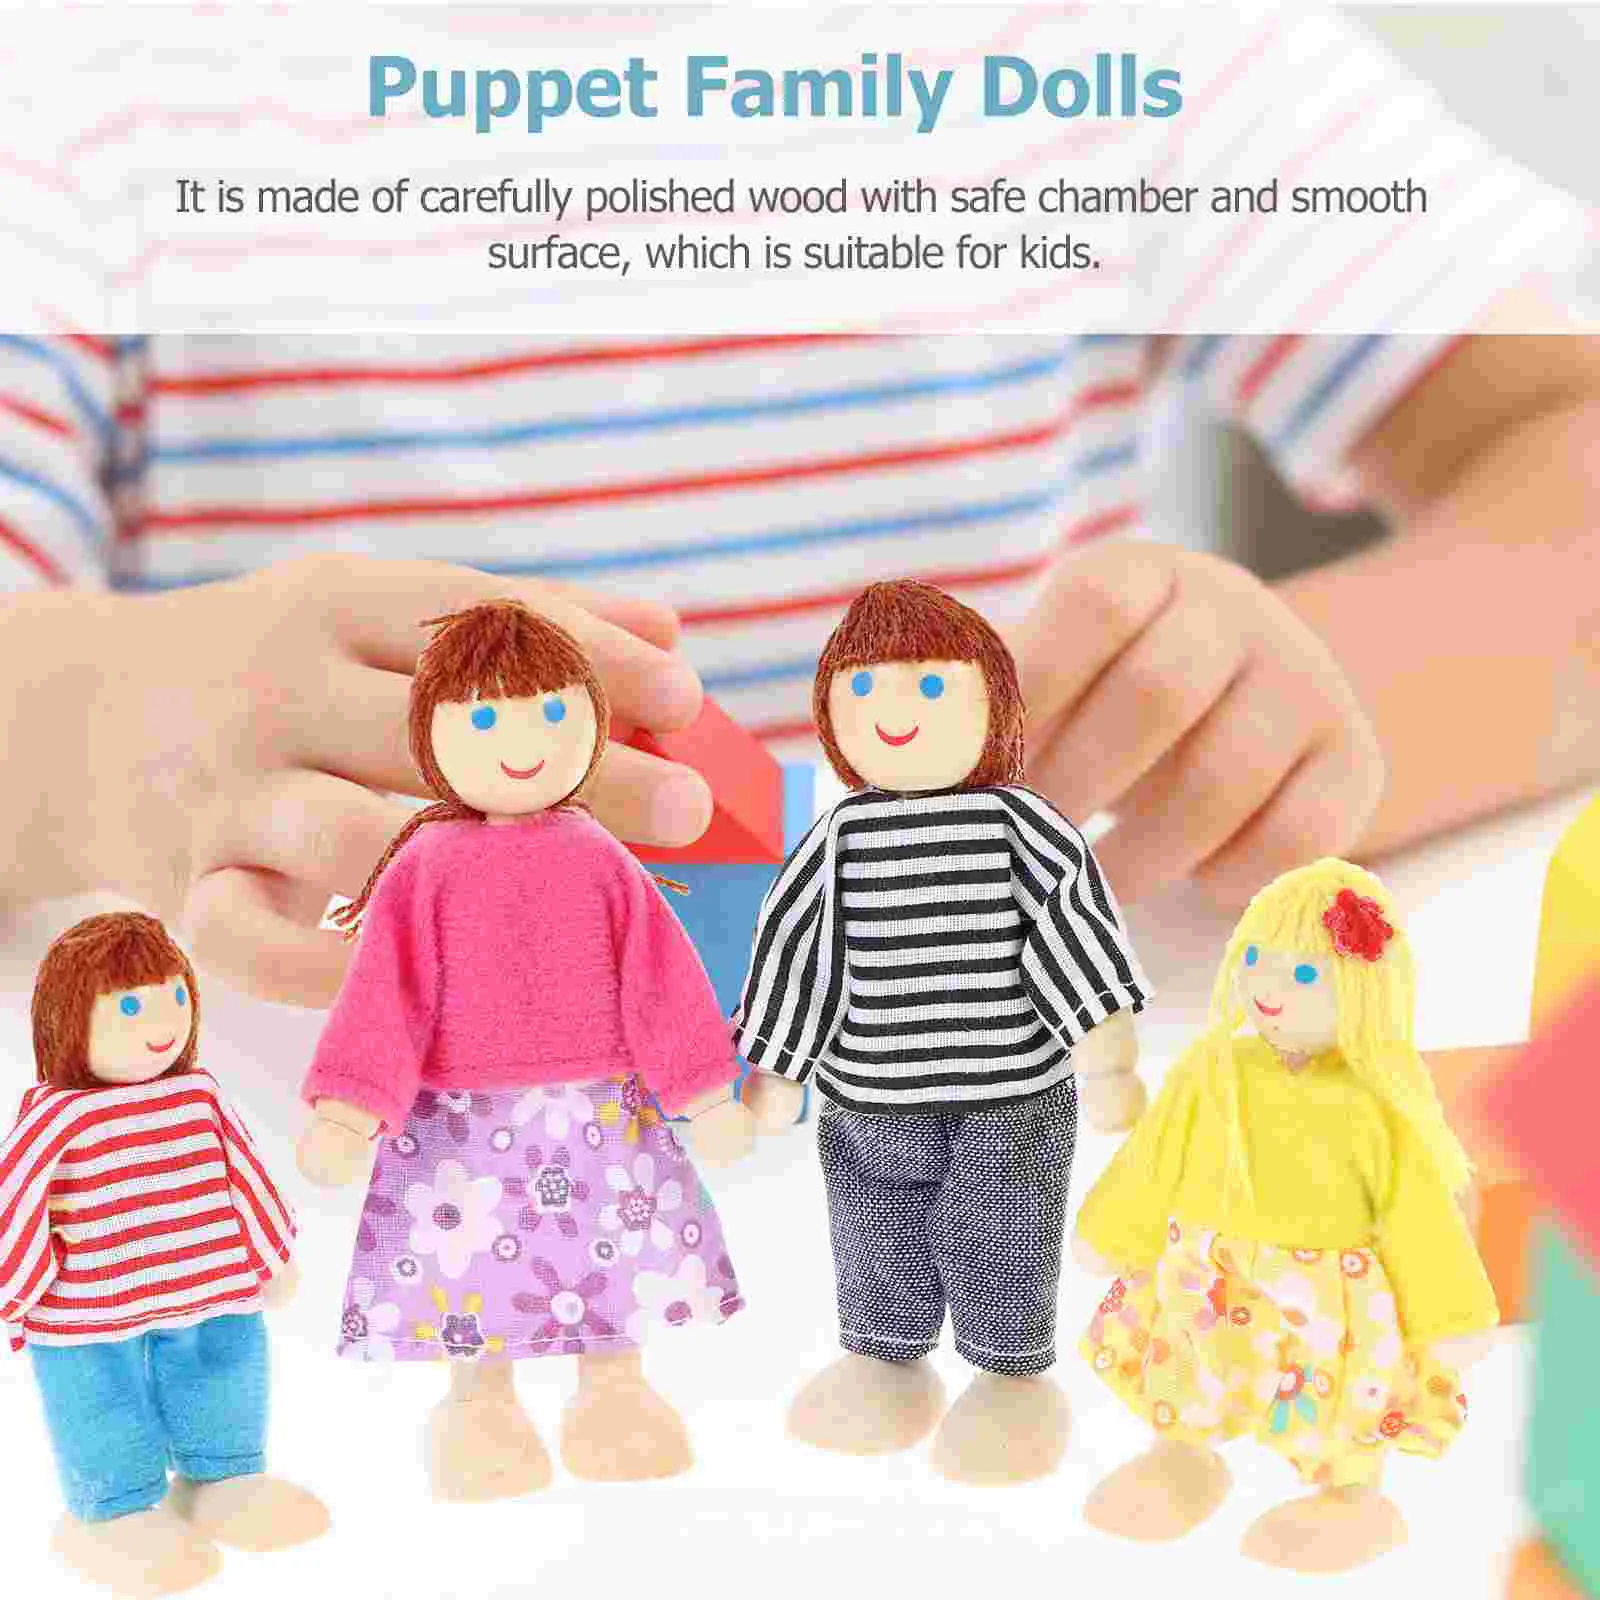 

Happy Family Puppets Playset: Wooden Figures Set of 6 People for Kids Children Pretend Gift 6pcs